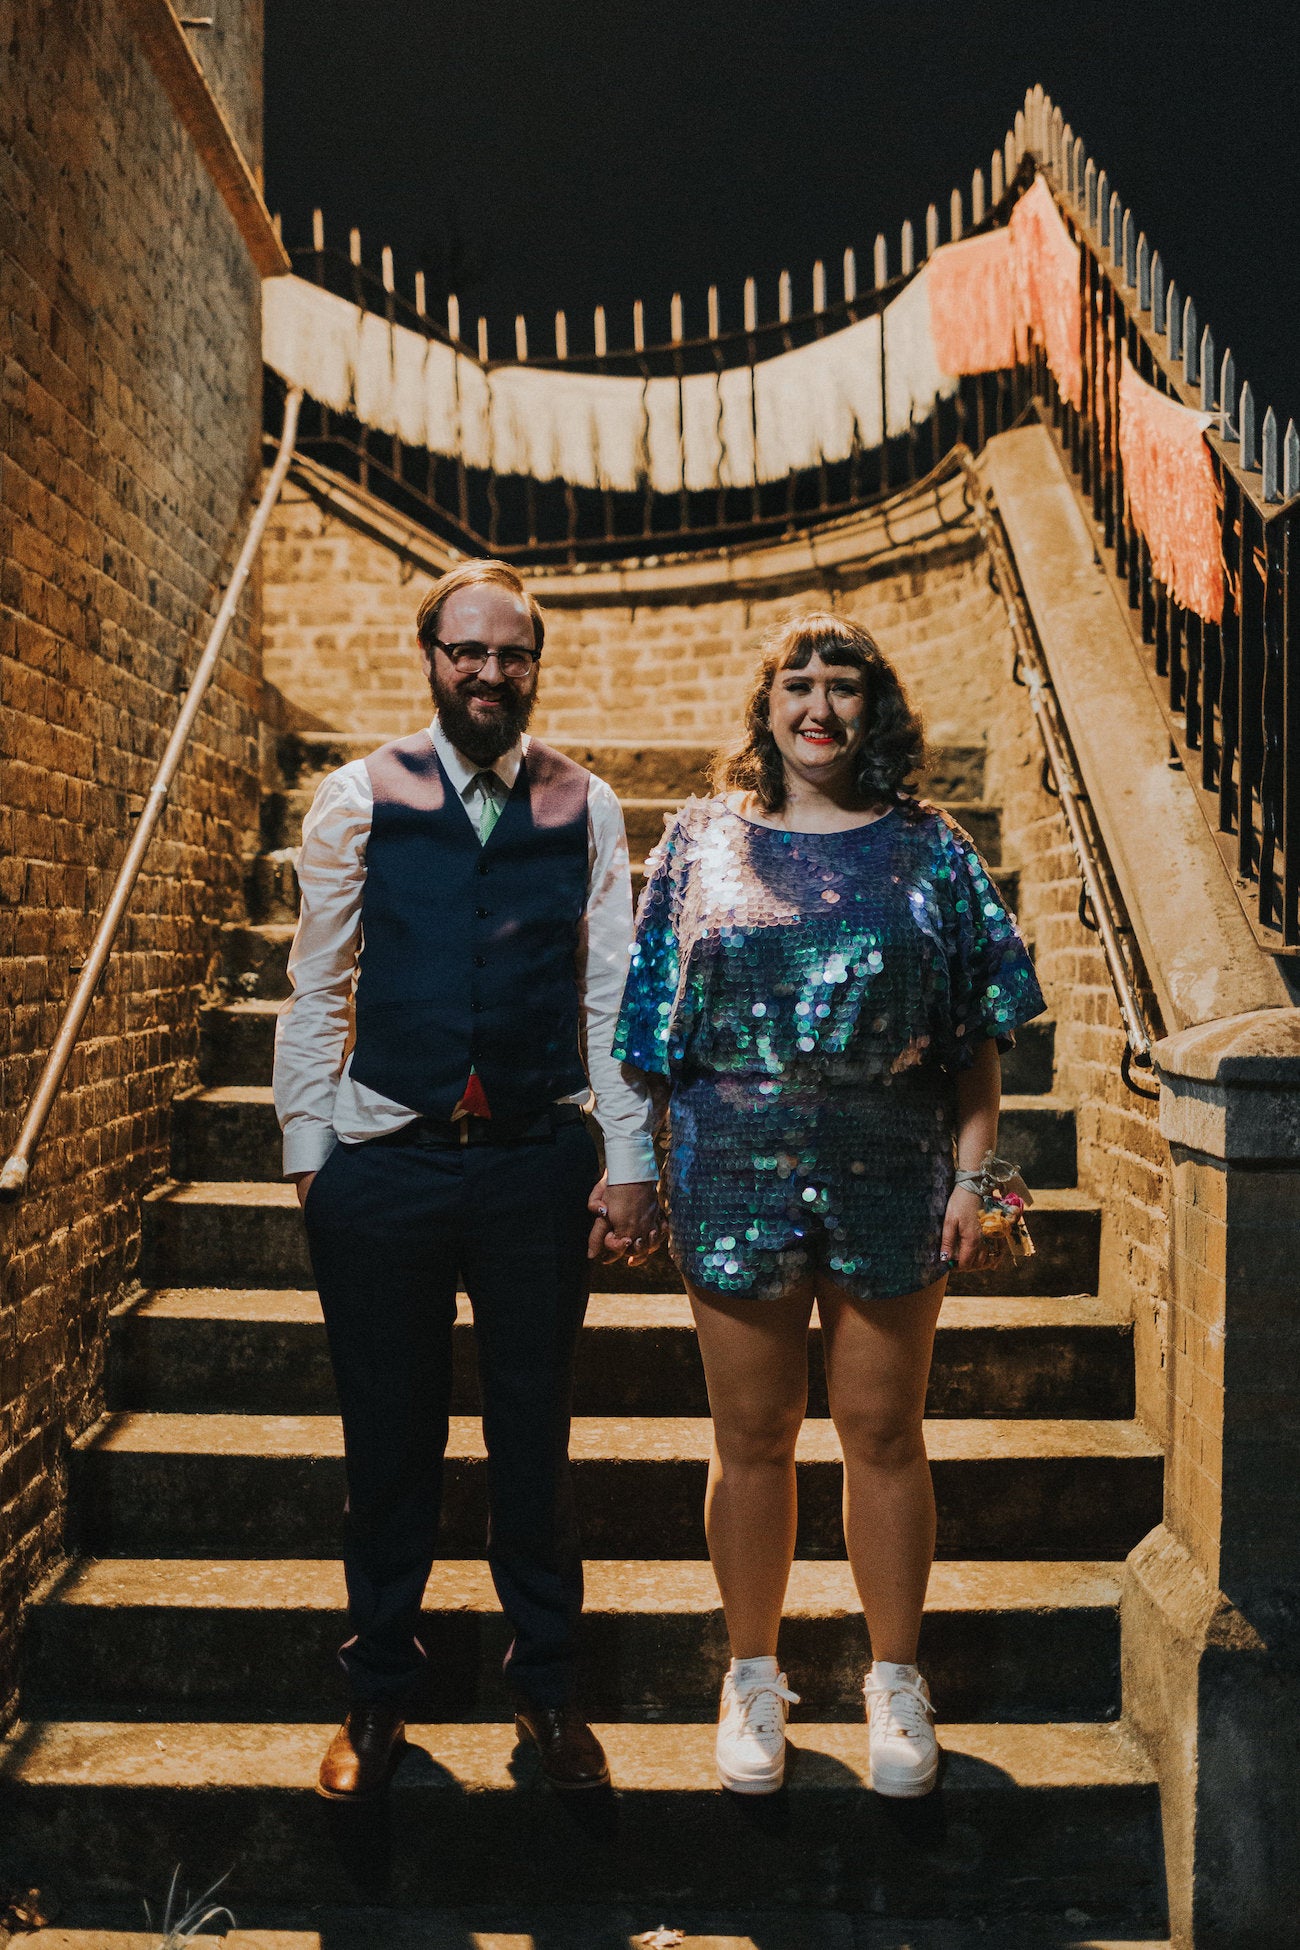 A newly wed couple pose for a photograph at night by some stone stairs and the woman wears a blue sequin romper. 